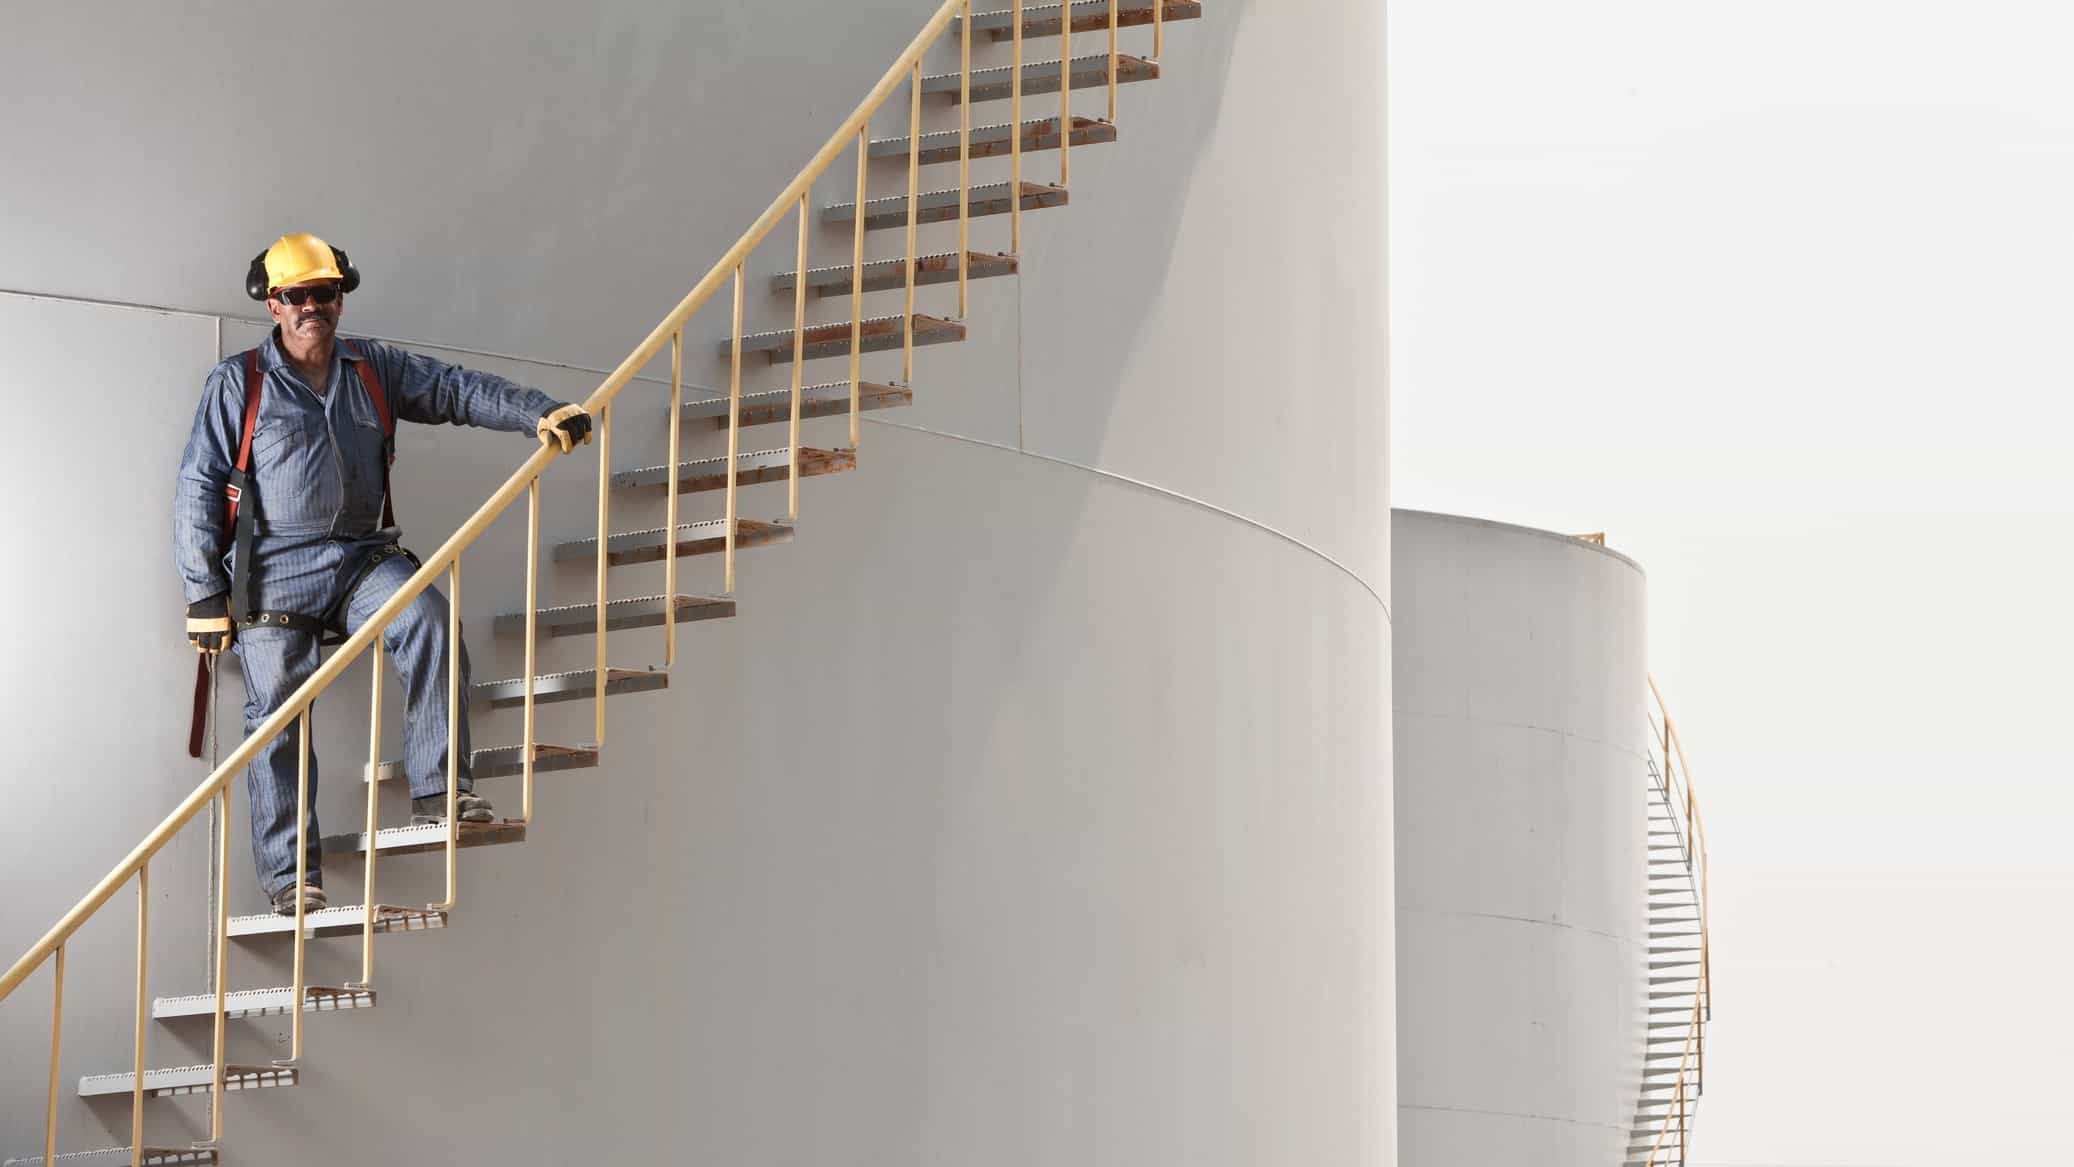 A plant worker walks up stairs on the outside of an oil silo.